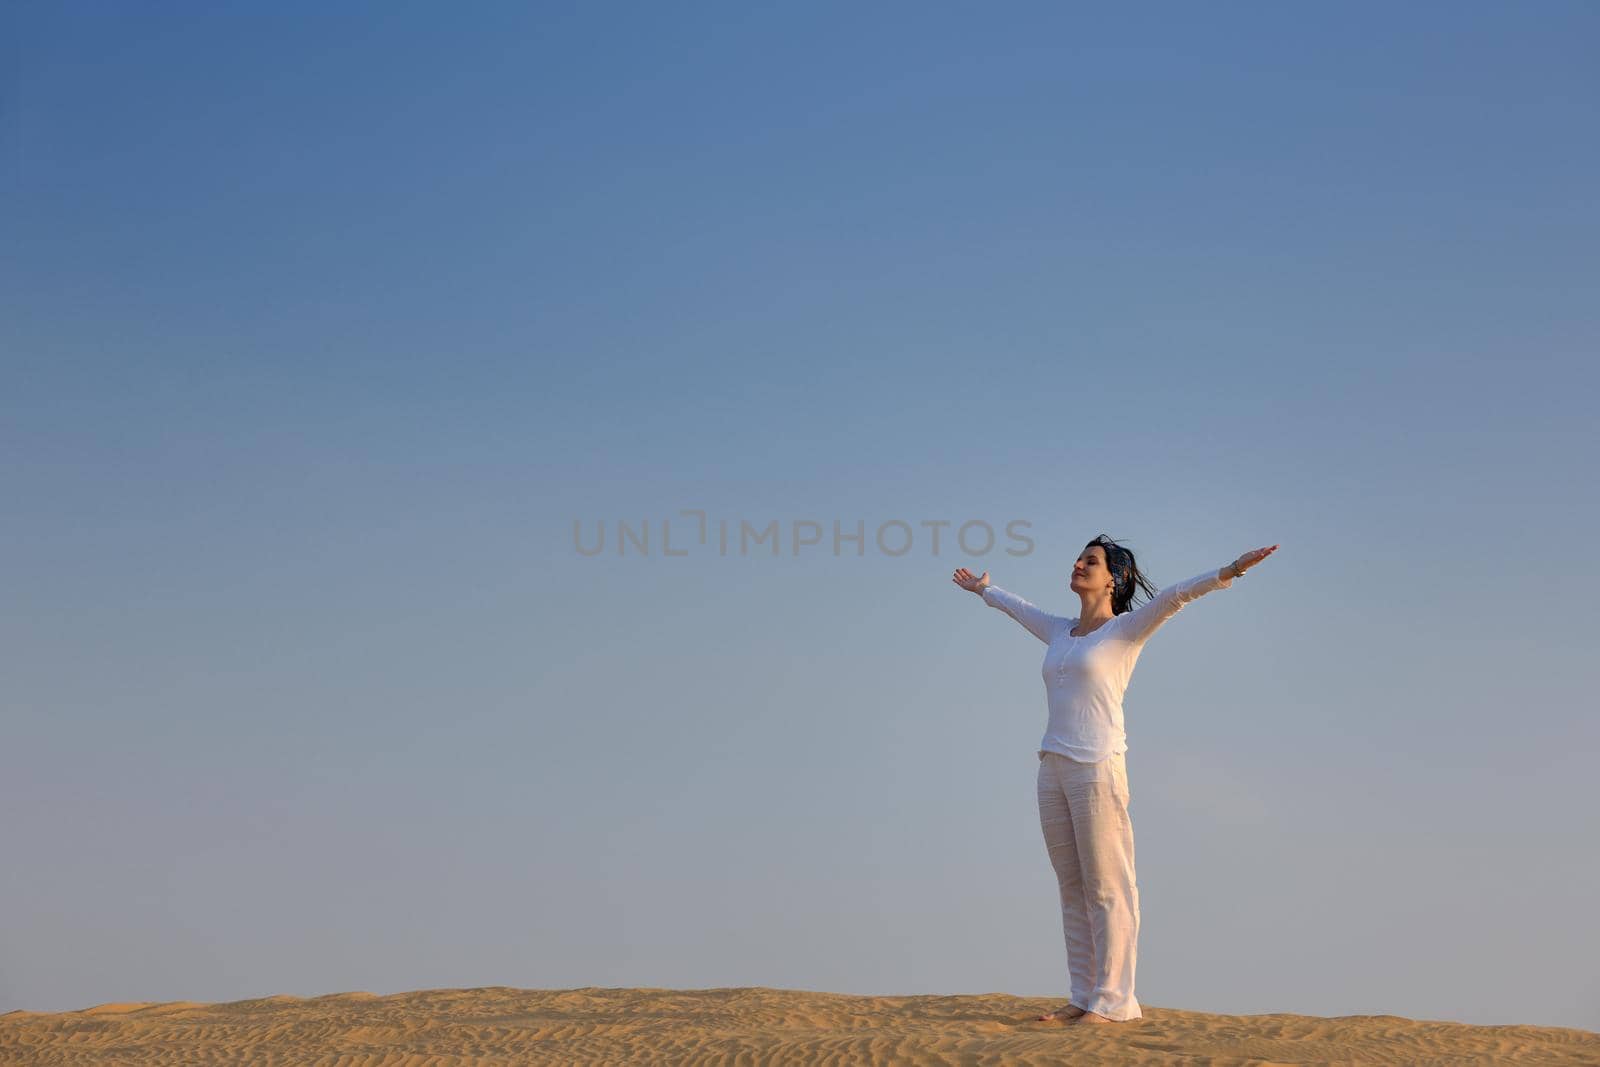 happy young woman relax and exercise yoga at desert in sunset